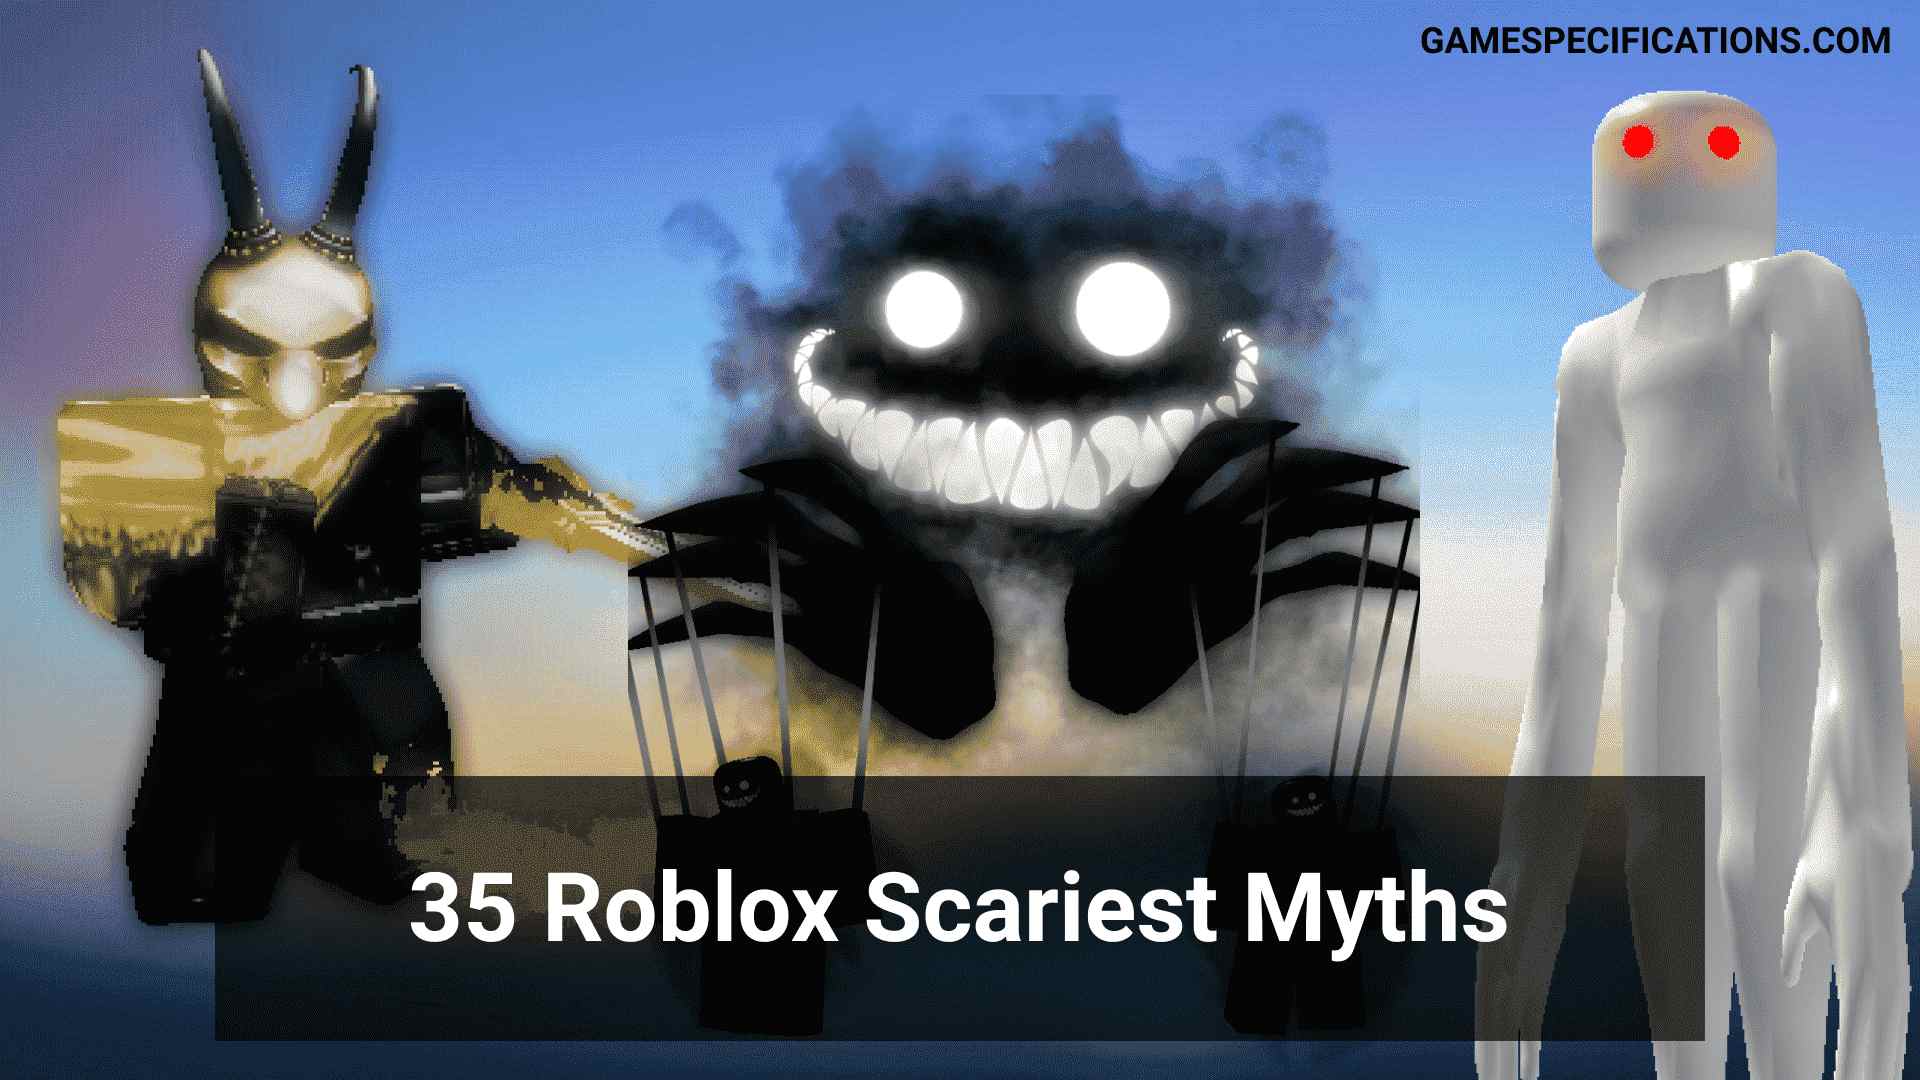 Roblox Myths A Scary Universe Of Roblox Game Specifications - myth game roblox